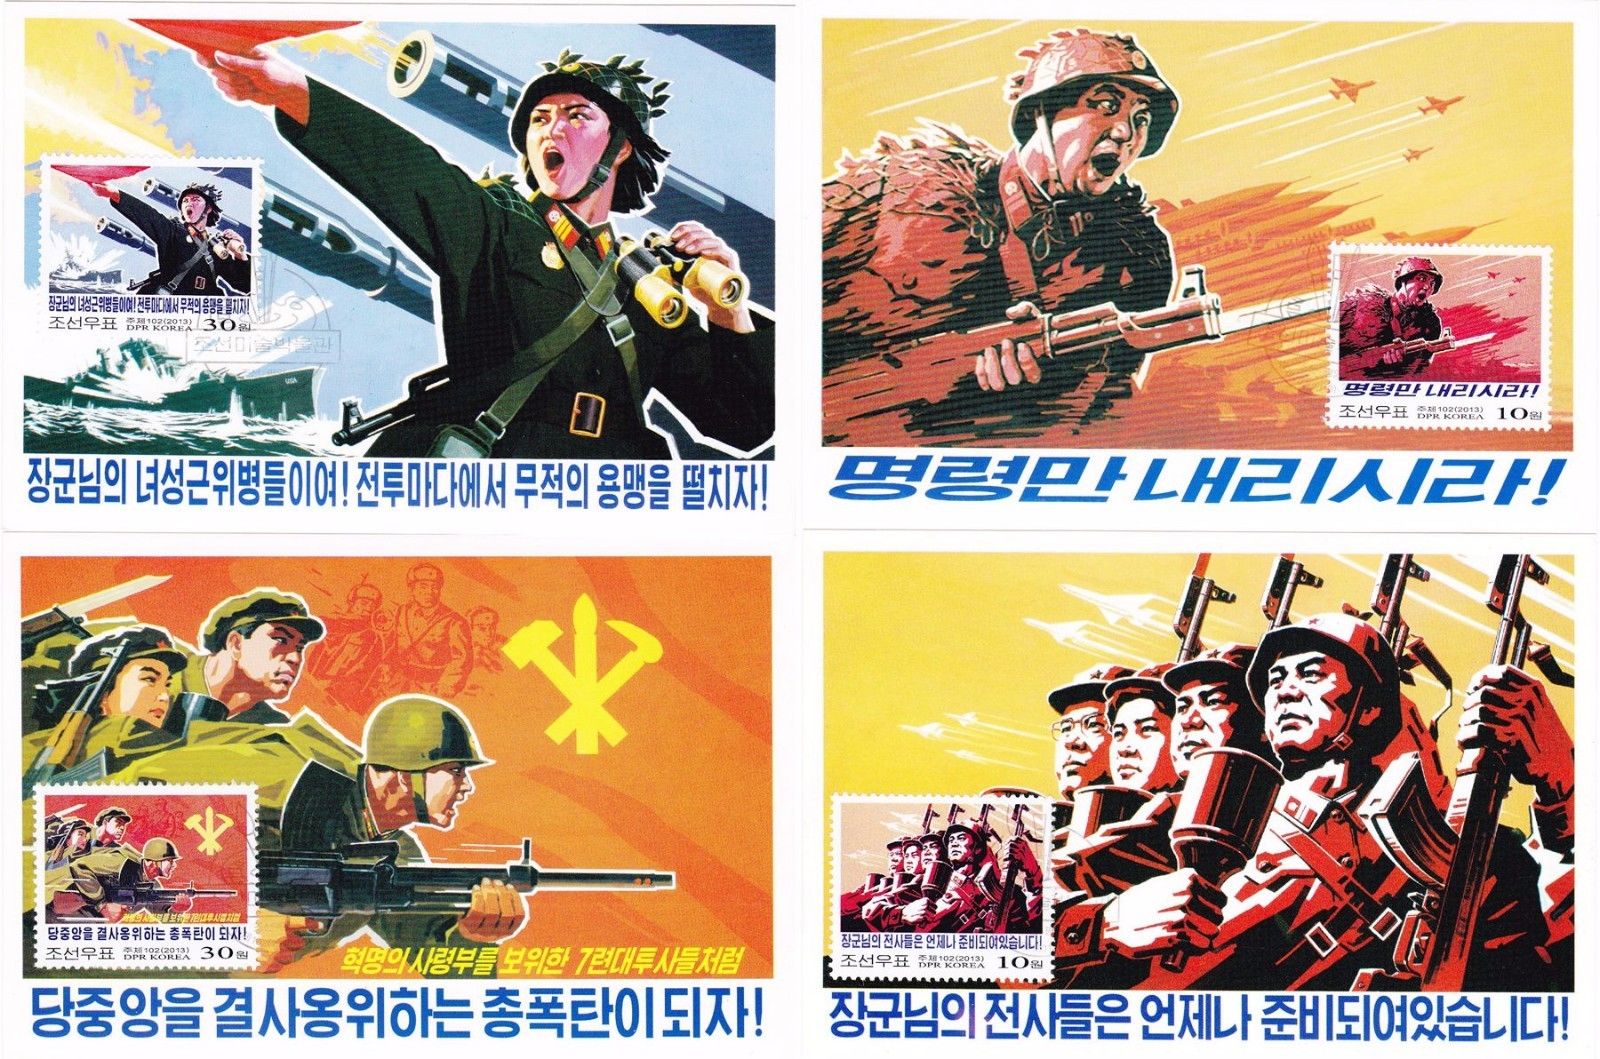 Maximum cards issued for Struggle Against U.S. Imperialism Month 2013